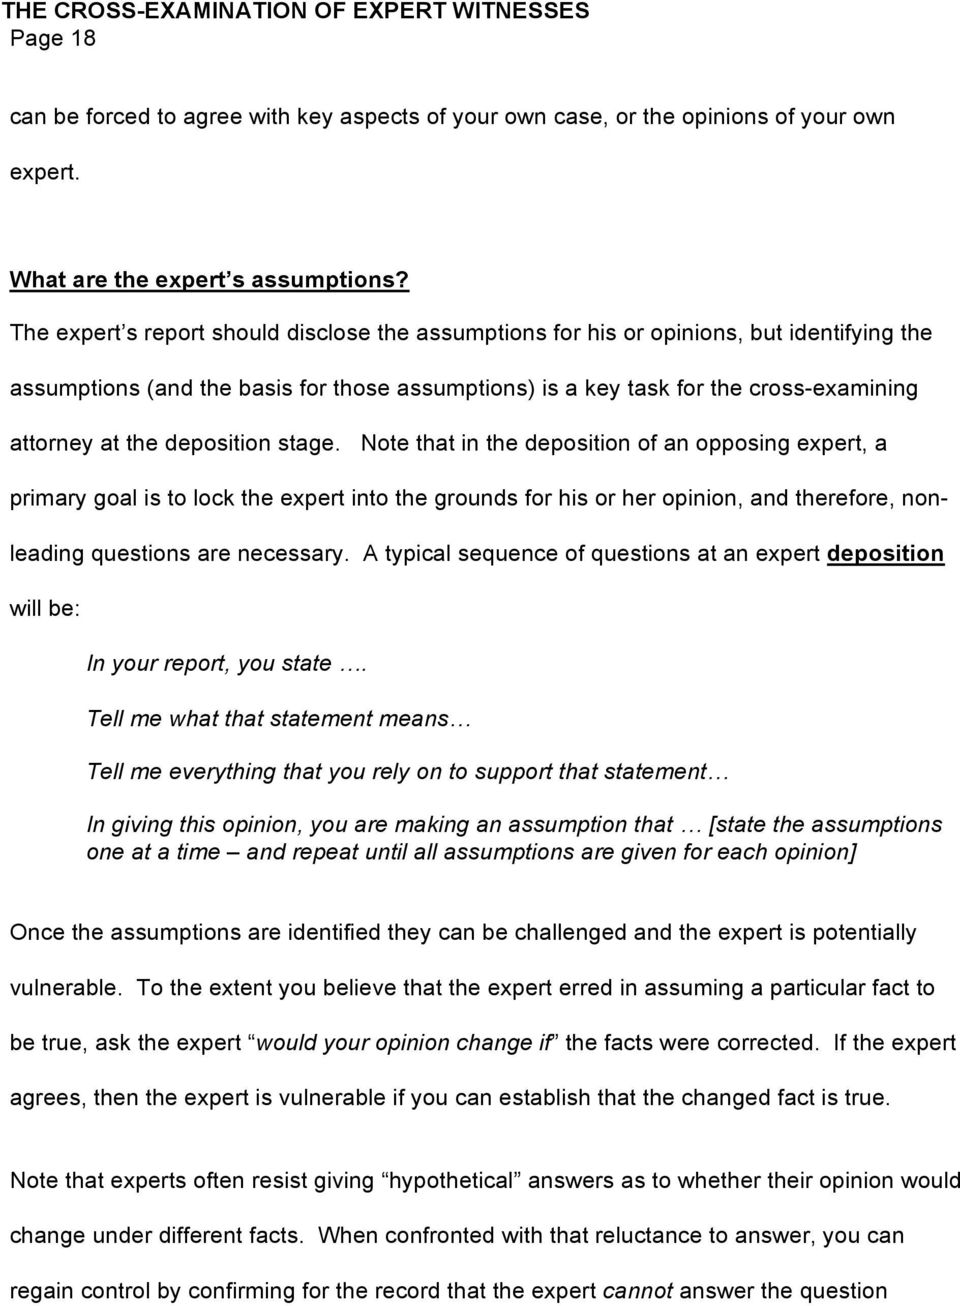 deposition stage. Note that in the deposition of an opposing expert, a primary goal is to lock the expert into the grounds for his or her opinion, and therefore, nonleading questions are necessary.